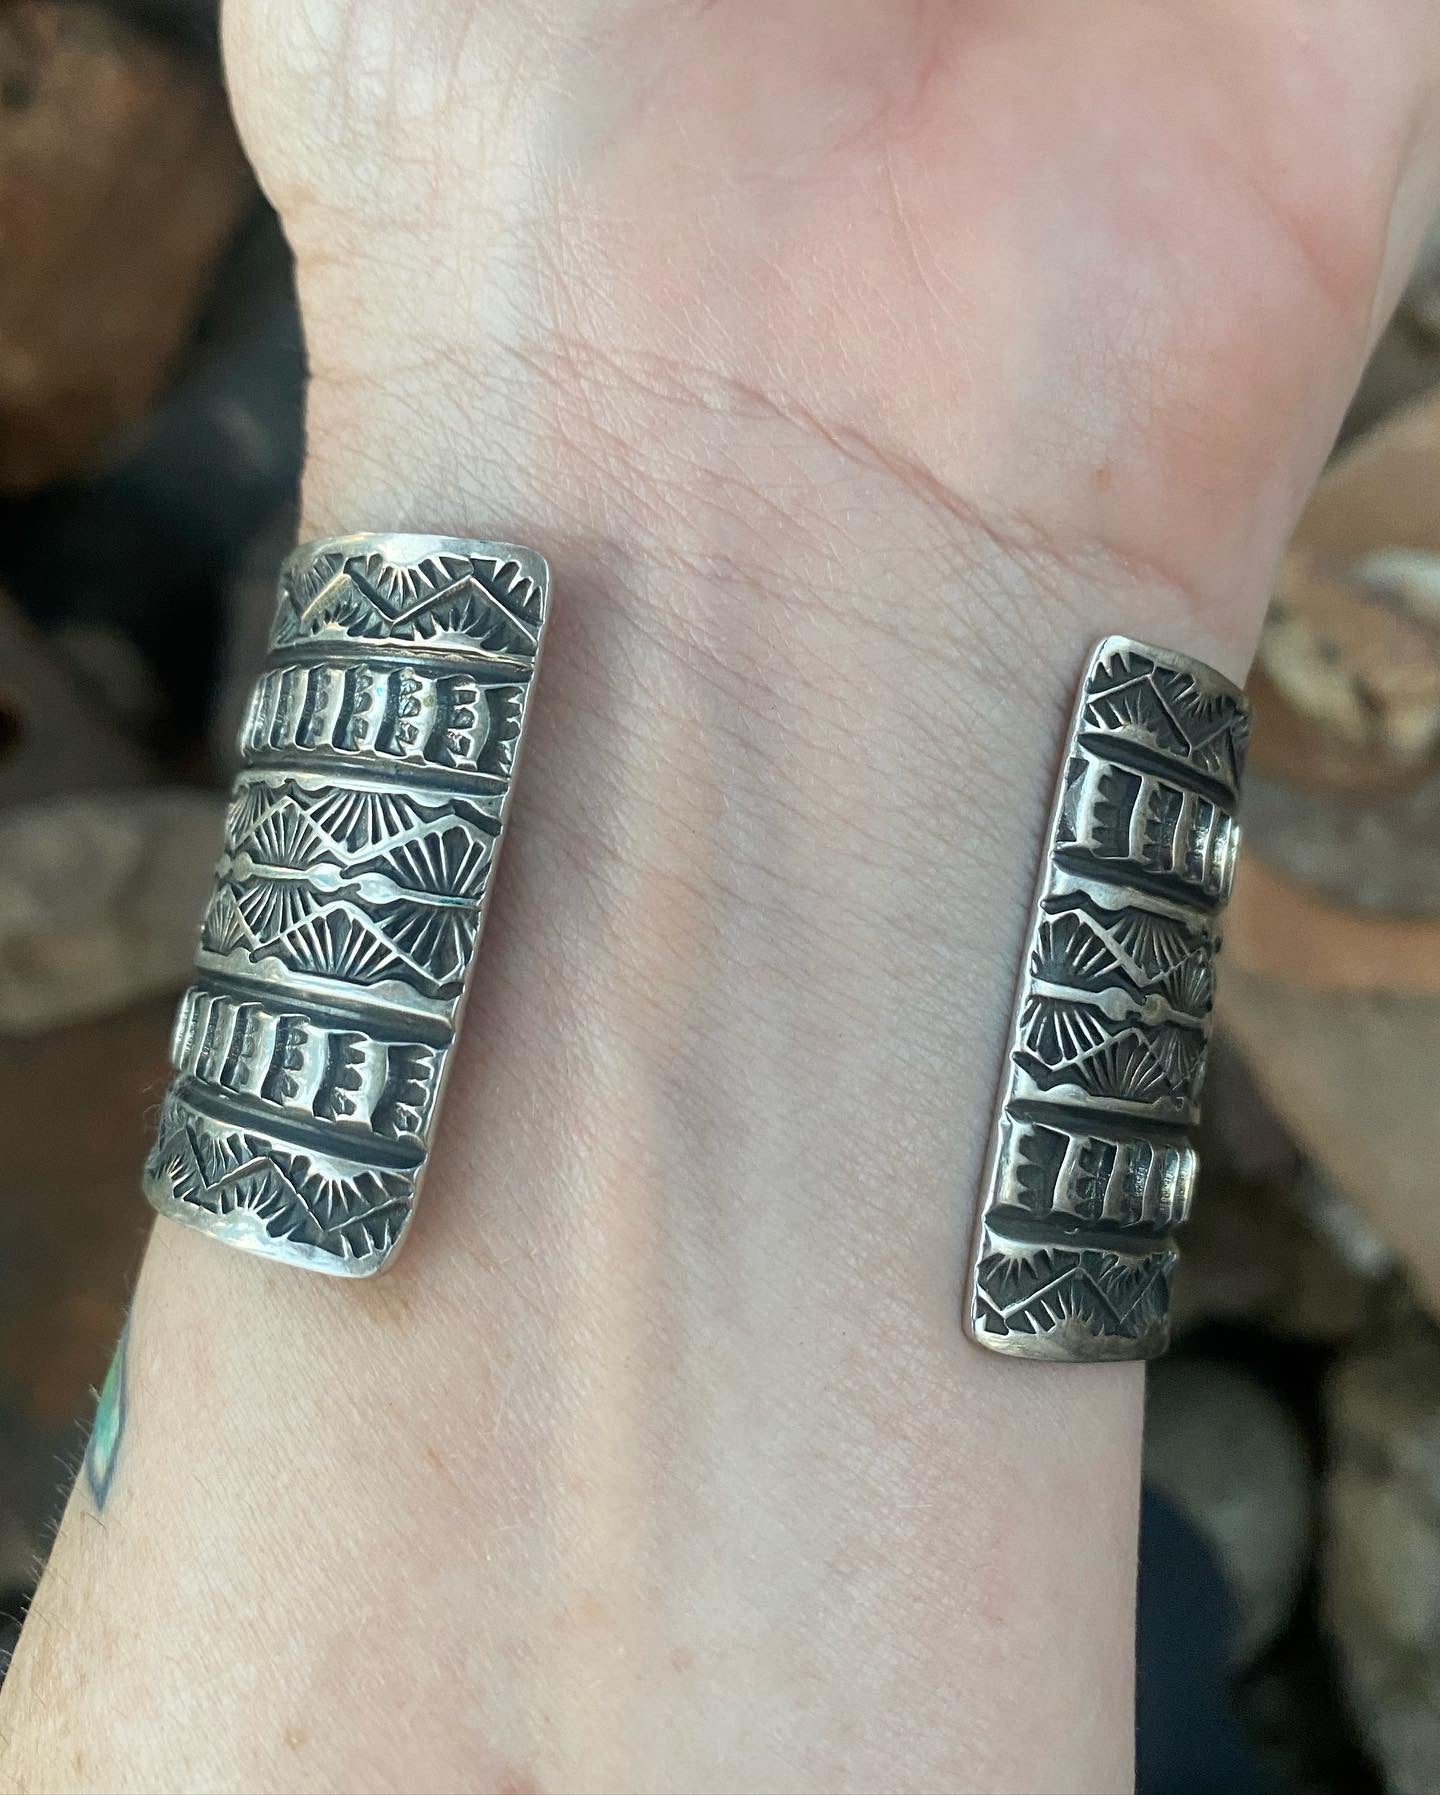 Sunshine Reeves Wide Stamped Cuff